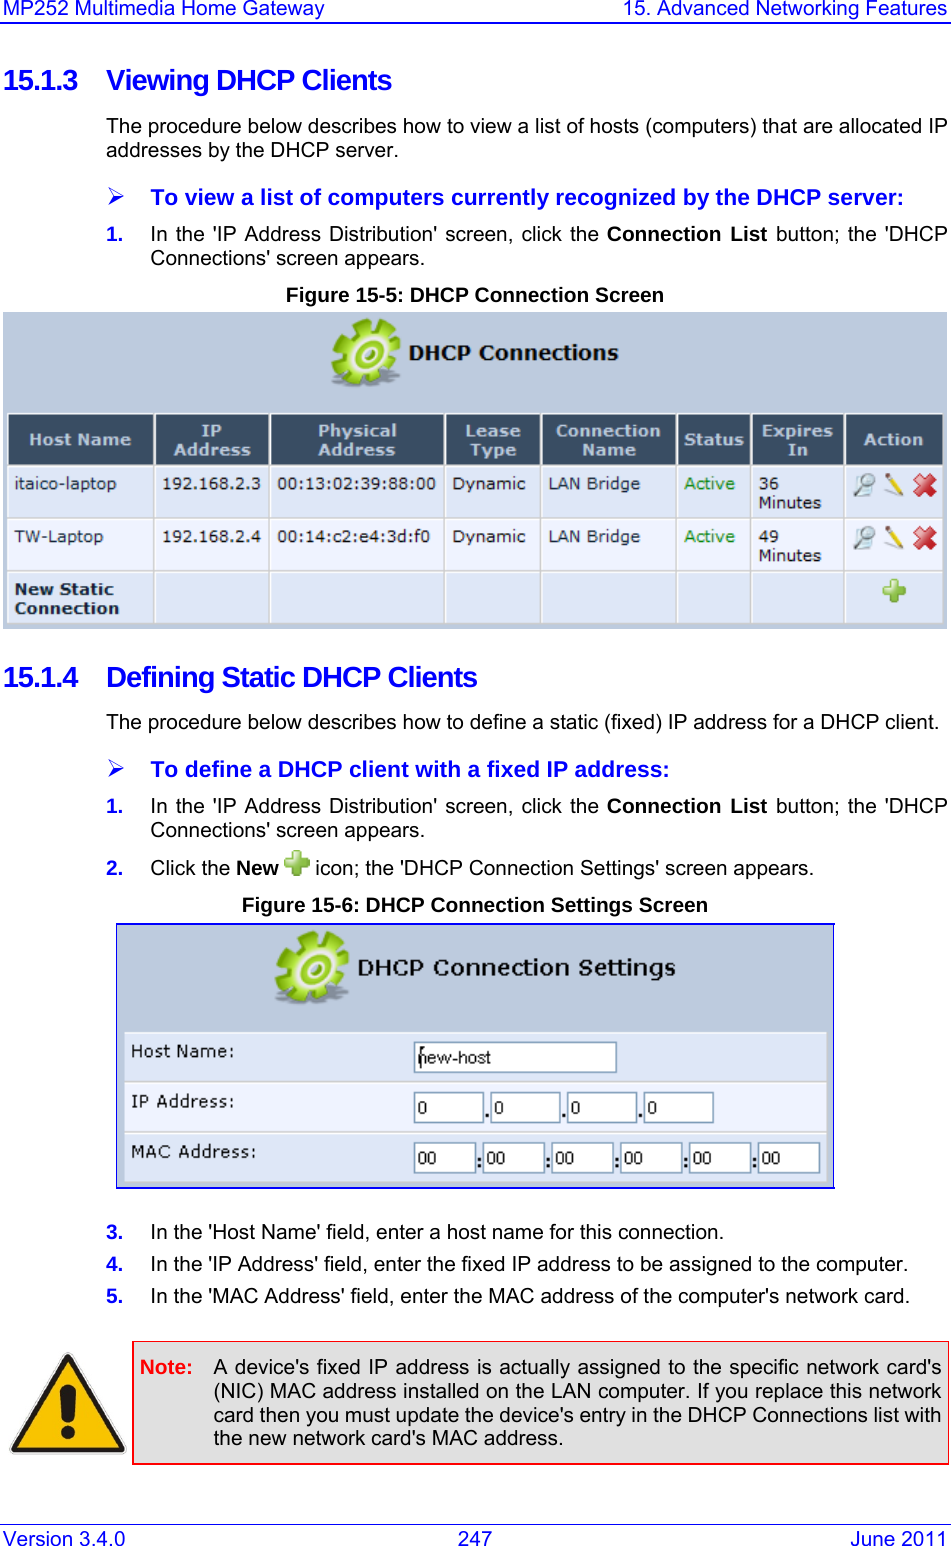 MP252 Multimedia Home Gateway  15. Advanced Networking Features Version 3.4.0  247  June 2011 15.1.3 Viewing DHCP Clients The procedure below describes how to view a list of hosts (computers) that are allocated IP addresses by the DHCP server.  ¾ To view a list of computers currently recognized by the DHCP server: 1.  In the &apos;IP Address Distribution&apos; screen, click the Connection List button; the &apos;DHCP Connections&apos; screen appears. Figure 15-5: DHCP Connection Screen   15.1.4  Defining Static DHCP Clients The procedure below describes how to define a static (fixed) IP address for a DHCP client. ¾ To define a DHCP client with a fixed IP address: 1.  In the &apos;IP Address Distribution&apos; screen, click the Connection List button; the &apos;DHCP Connections&apos; screen appears. 2.  Click the New   icon; the &apos;DHCP Connection Settings&apos; screen appears. Figure 15-6: DHCP Connection Settings Screen  3.  In the &apos;Host Name&apos; field, enter a host name for this connection. 4.  In the &apos;IP Address&apos; field, enter the fixed IP address to be assigned to the computer. 5.  In the &apos;MAC Address&apos; field, enter the MAC address of the computer&apos;s network card.   Note:  A device&apos;s fixed IP address is actually assigned to the specific network card&apos;s (NIC) MAC address installed on the LAN computer. If you replace this network card then you must update the device&apos;s entry in the DHCP Connections list with the new network card&apos;s MAC address.  